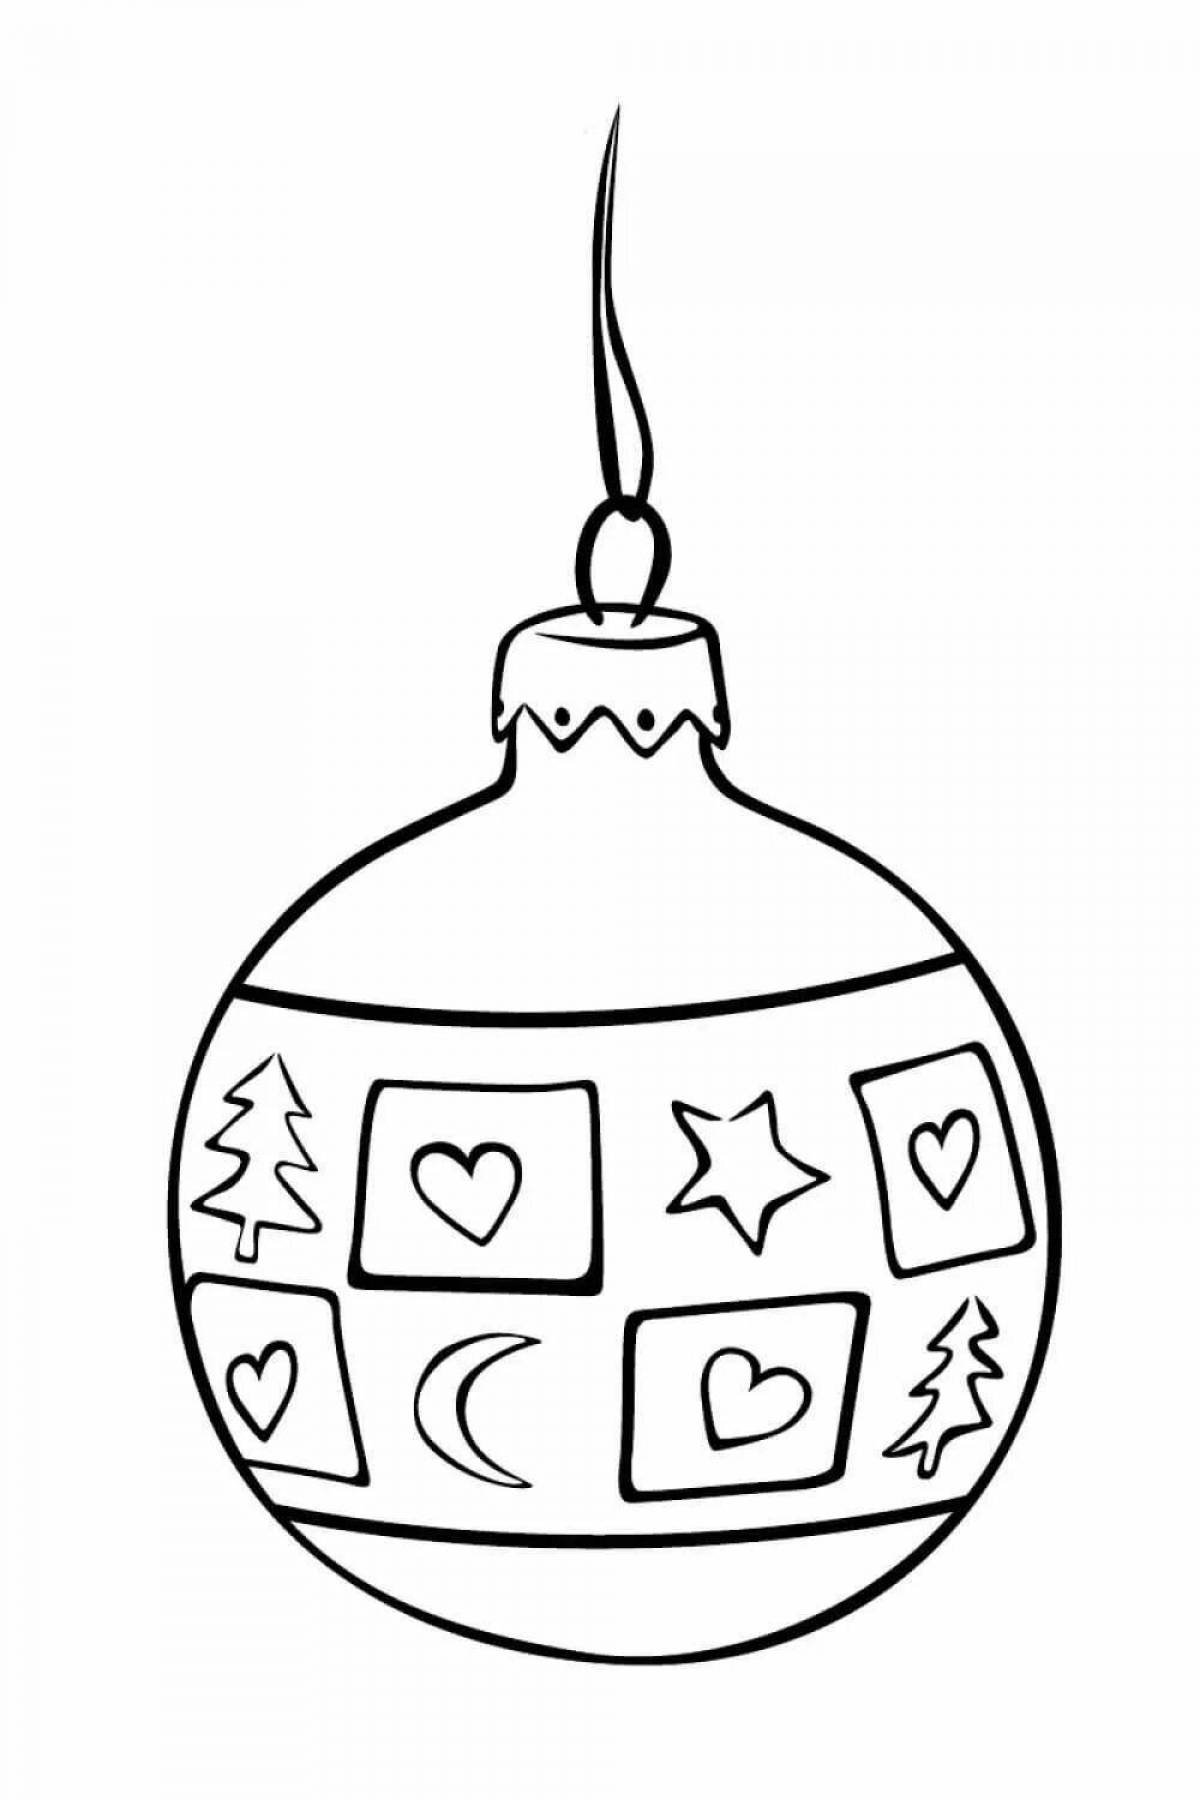 Coloring page merry christmas toy ball